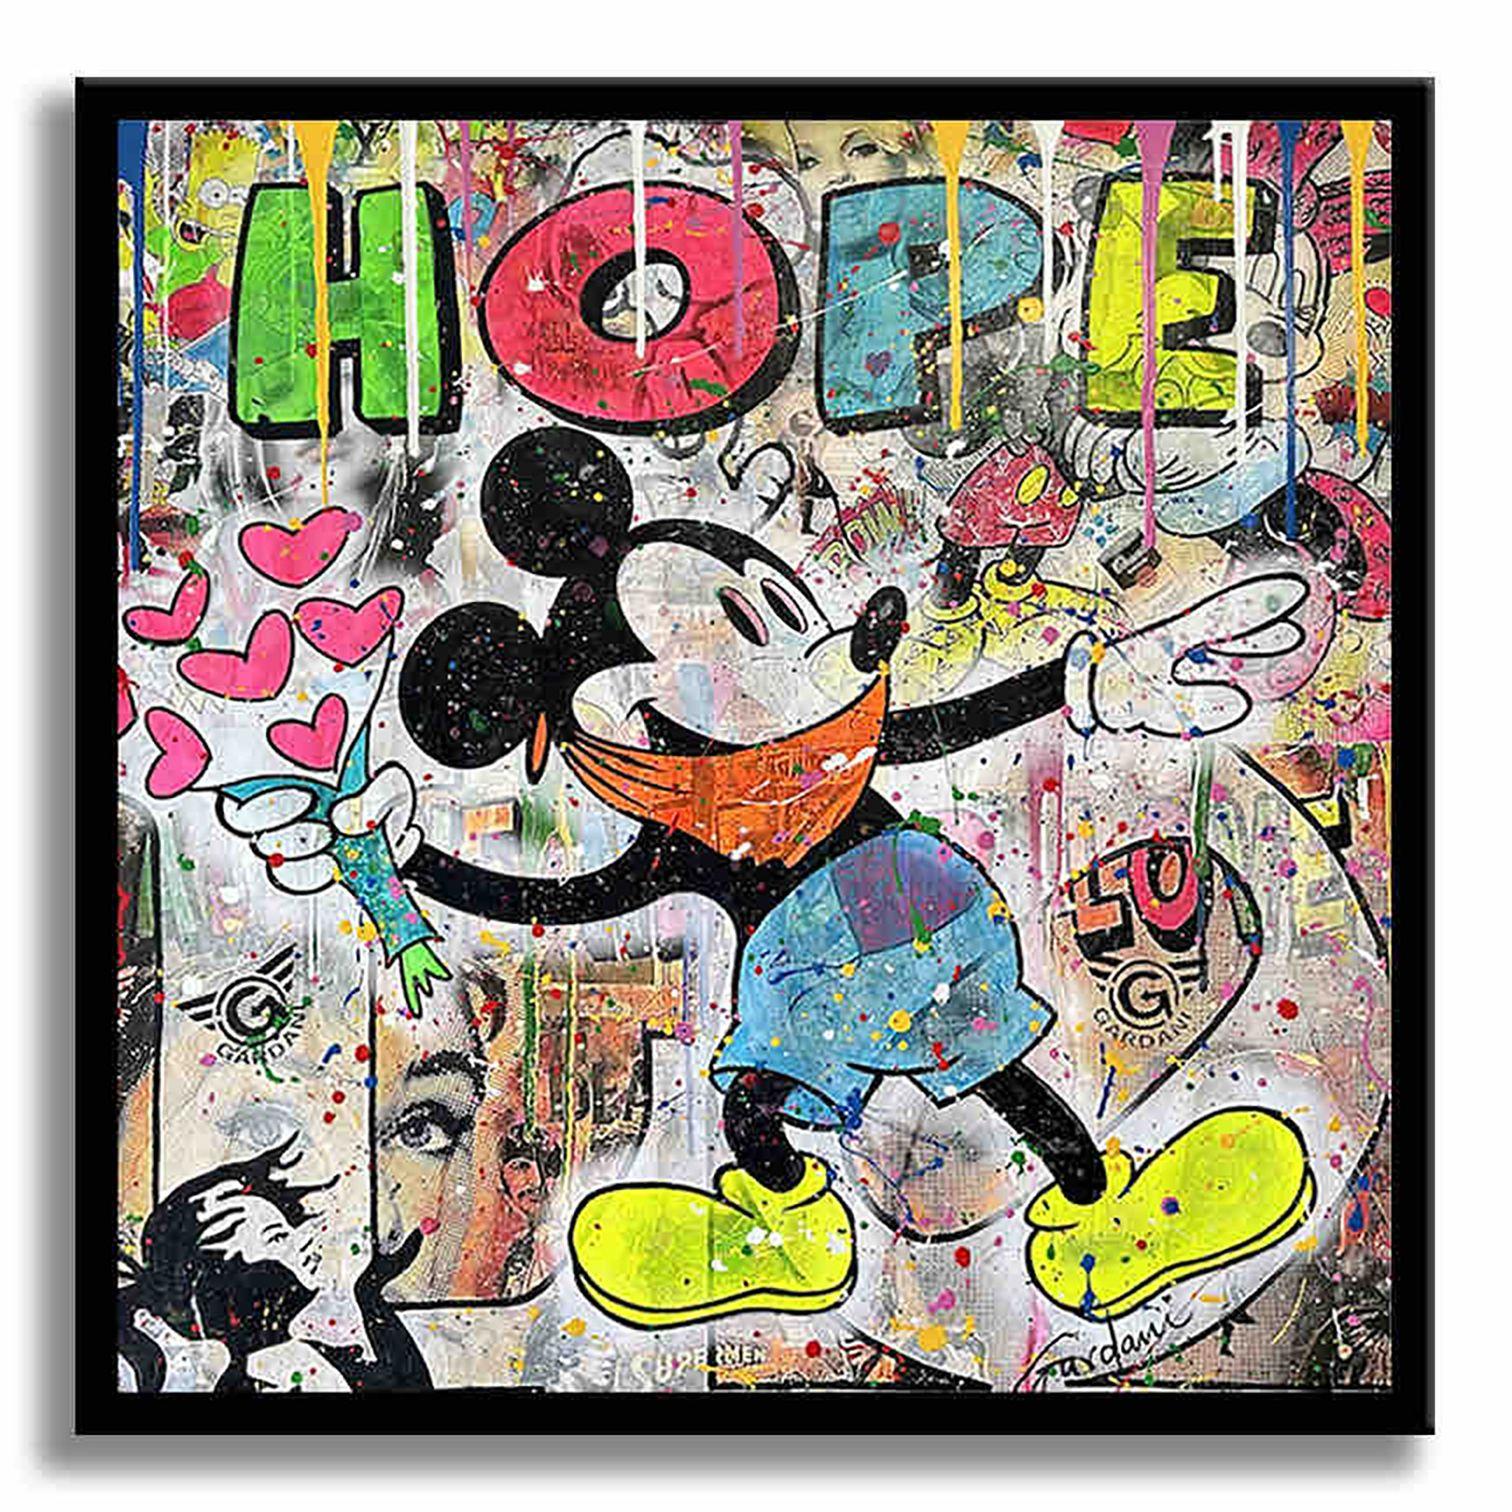 Choose Hope â€“ Original Painting on Canvas, Painting, Acrylic on Canvas For Sale 3